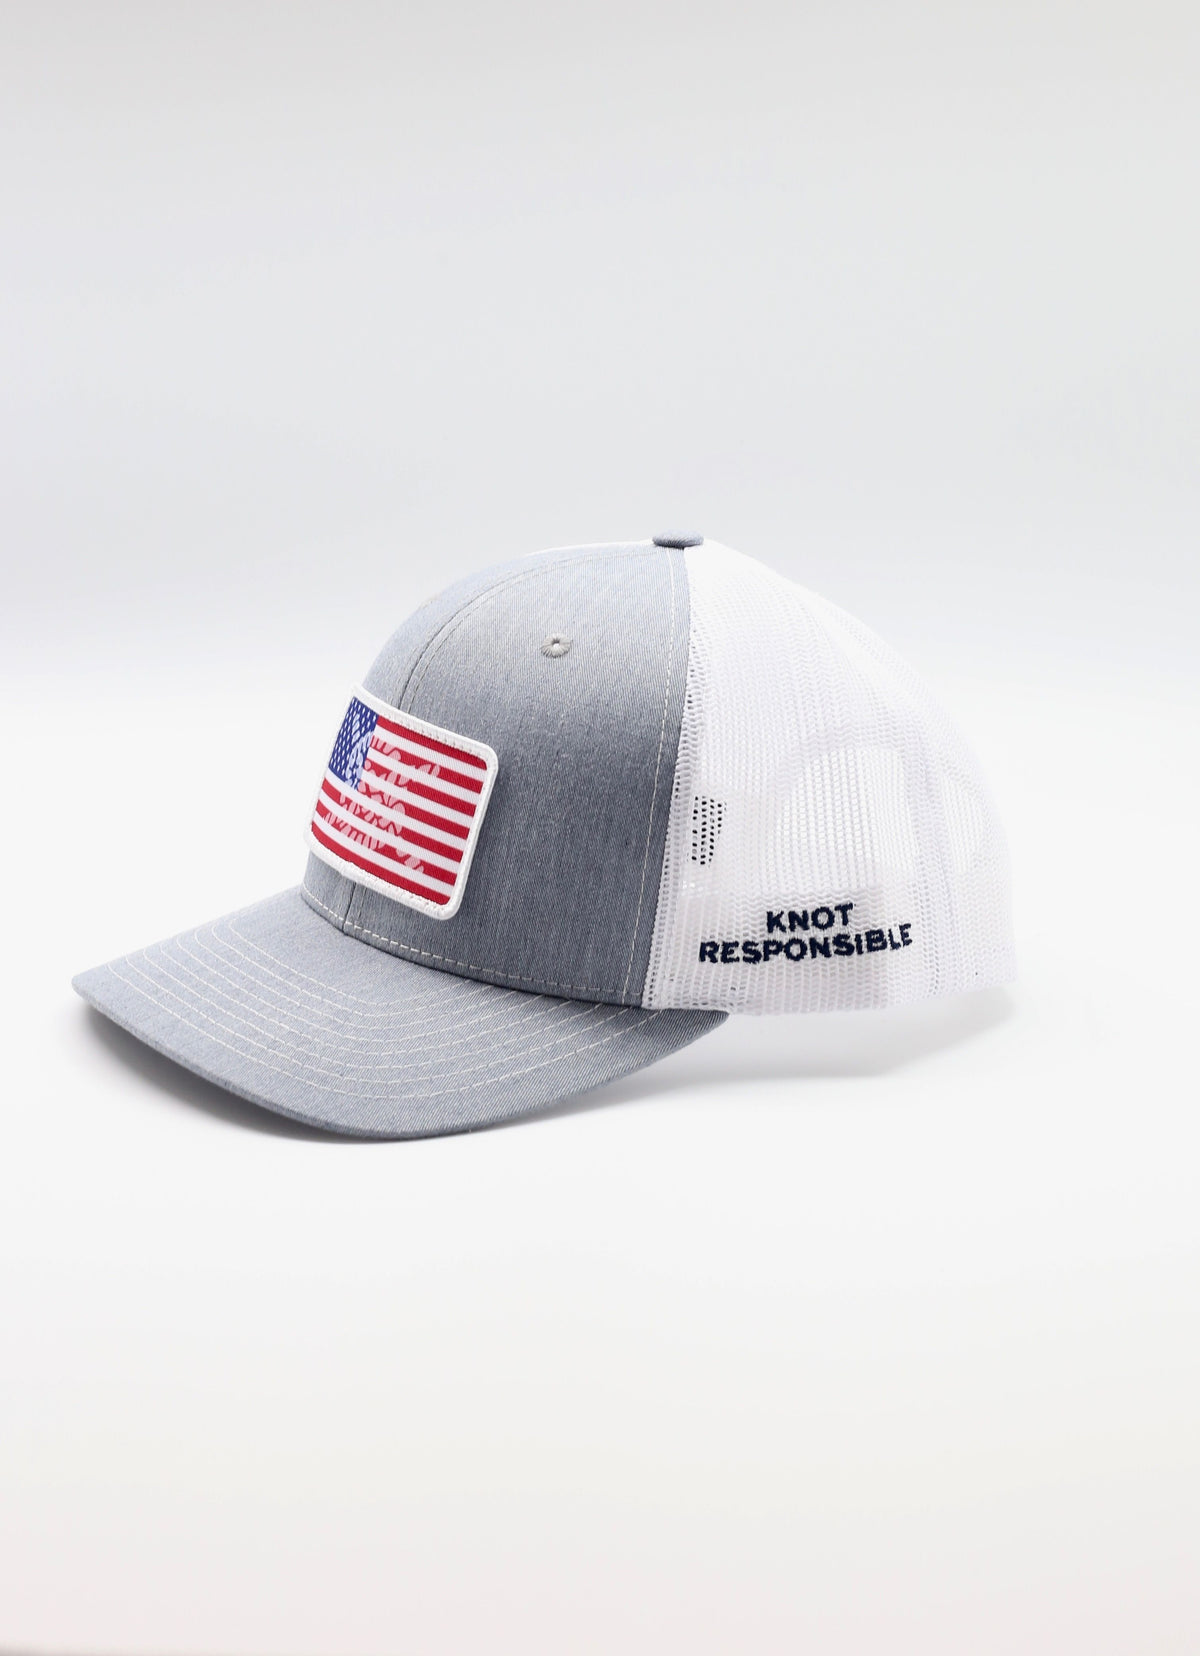 Limited Edition USA Patch Trucker Hat- Grey/White